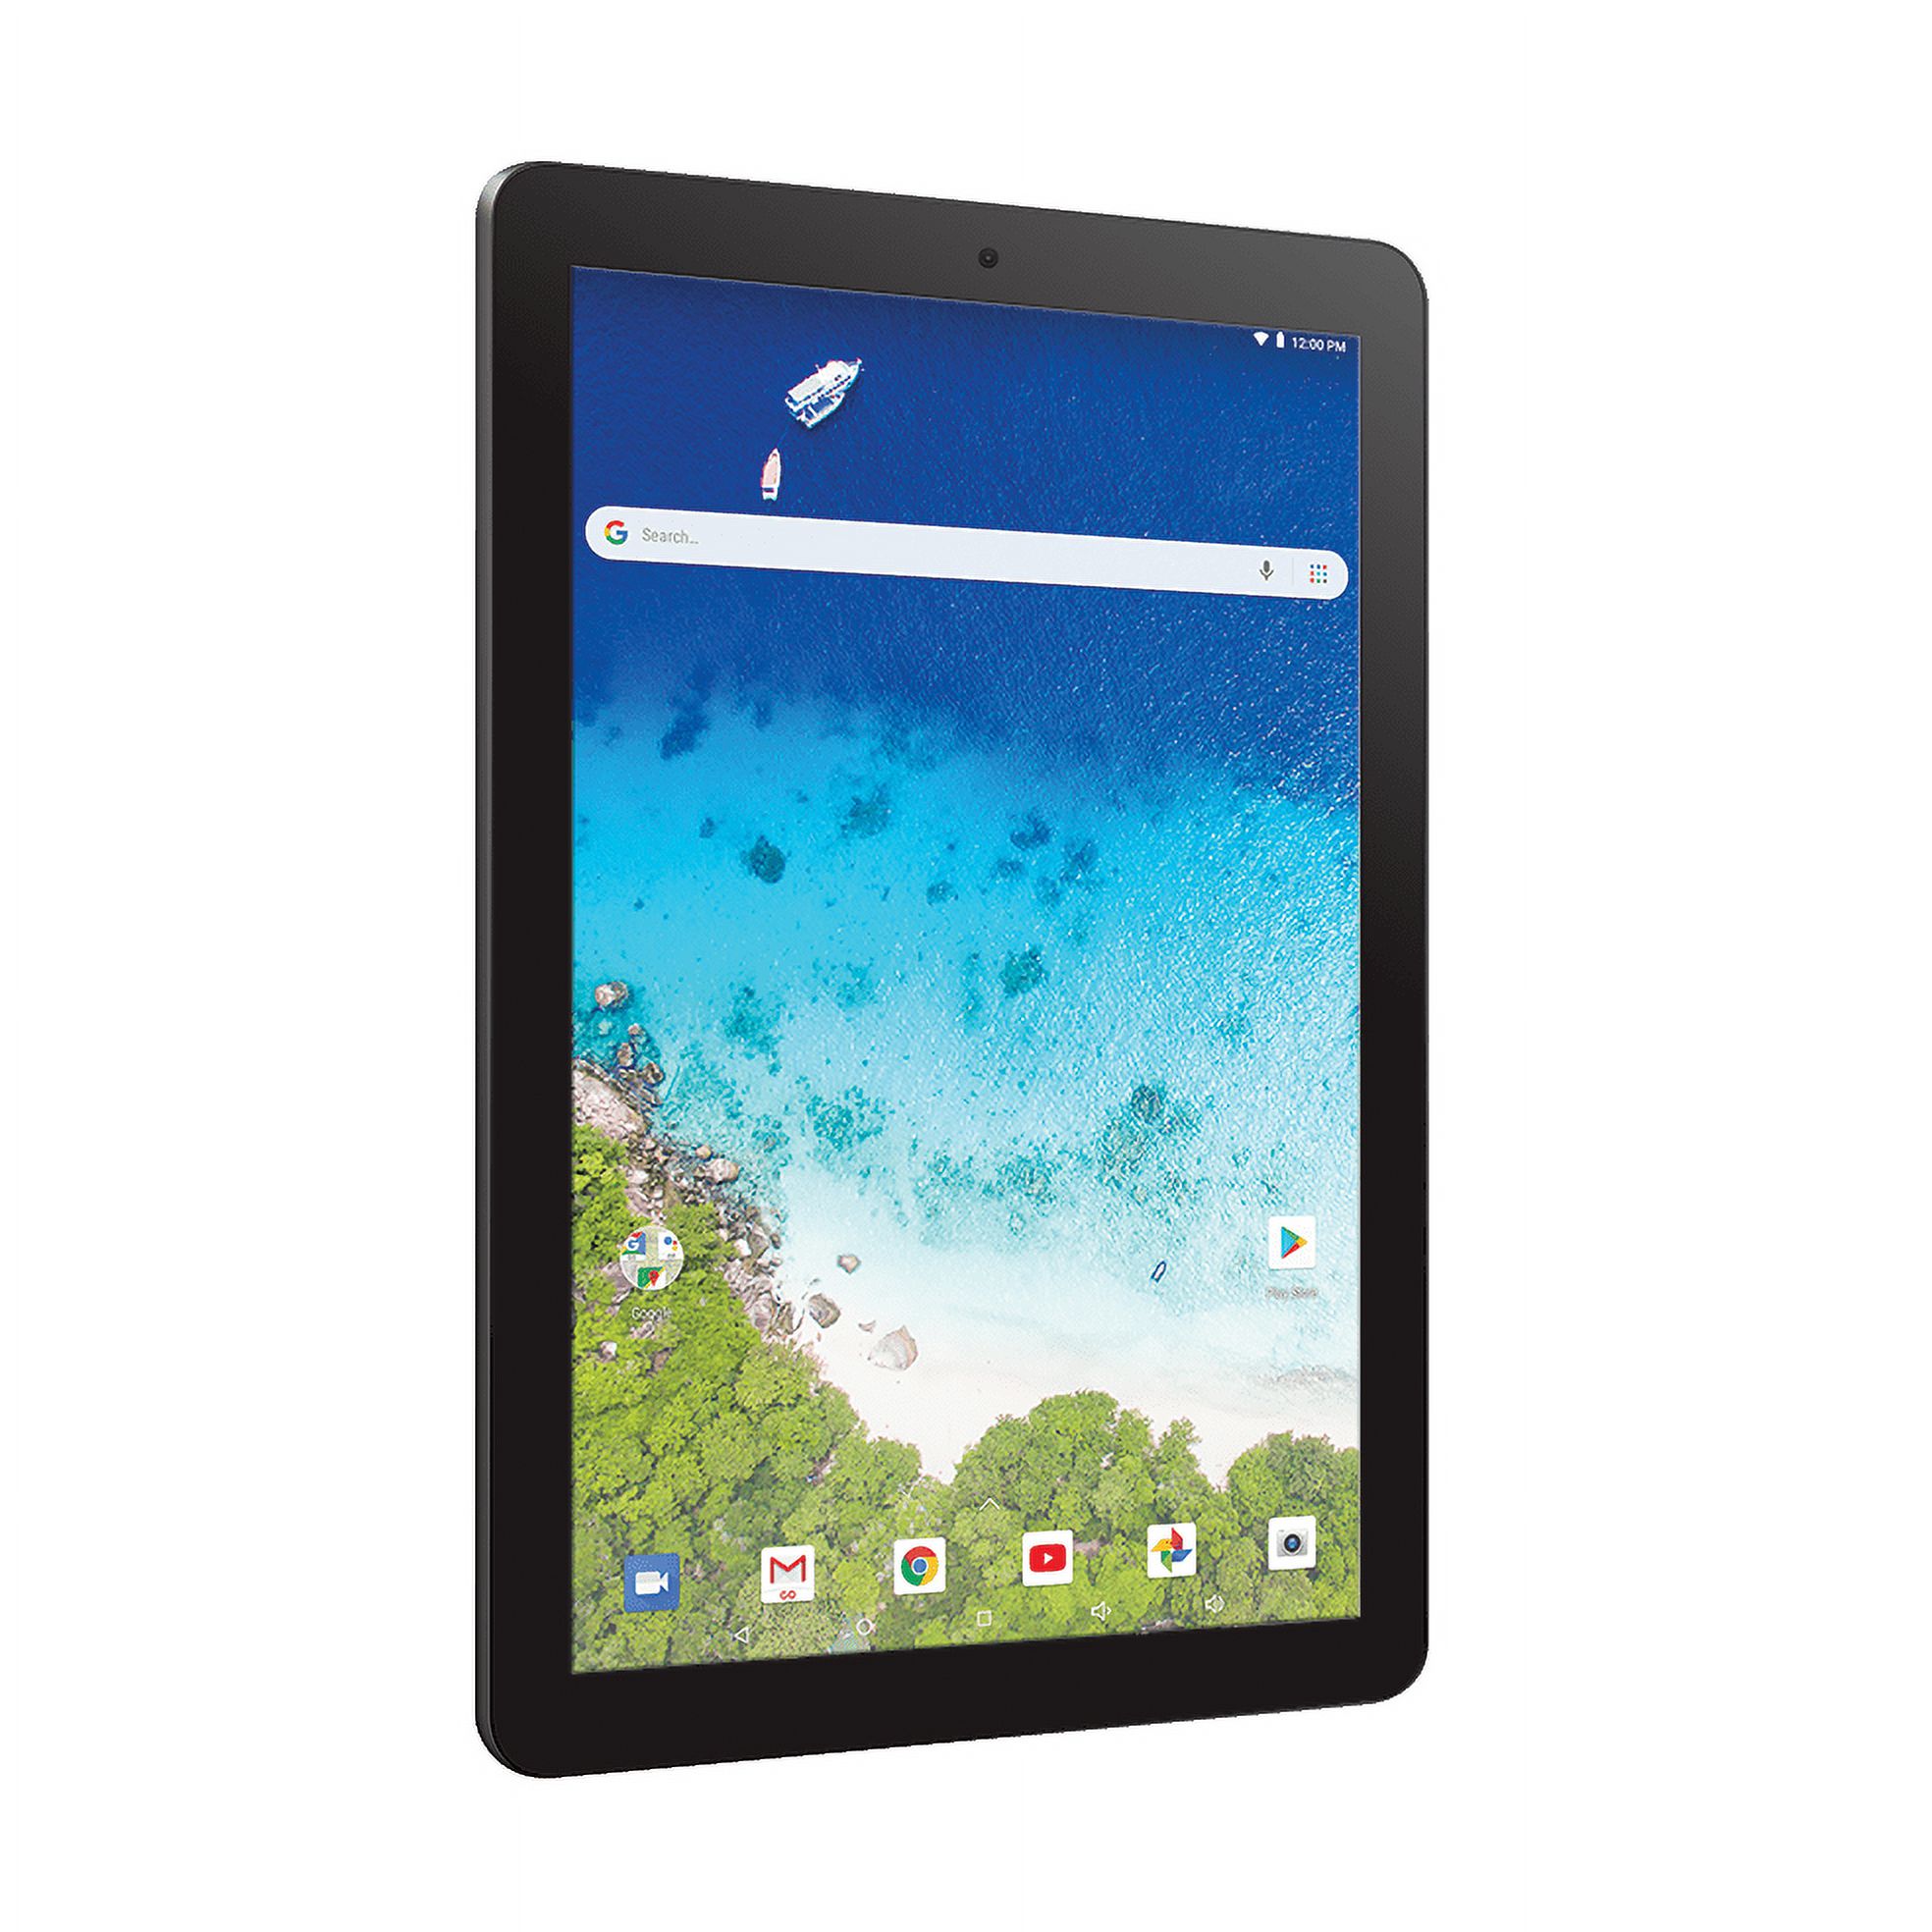 RCA Viking Pro 10.1" Android 2-in-1 Tablet 32GB Quad Core, Charcoal (Google Classroom Ready) - image 3 of 4